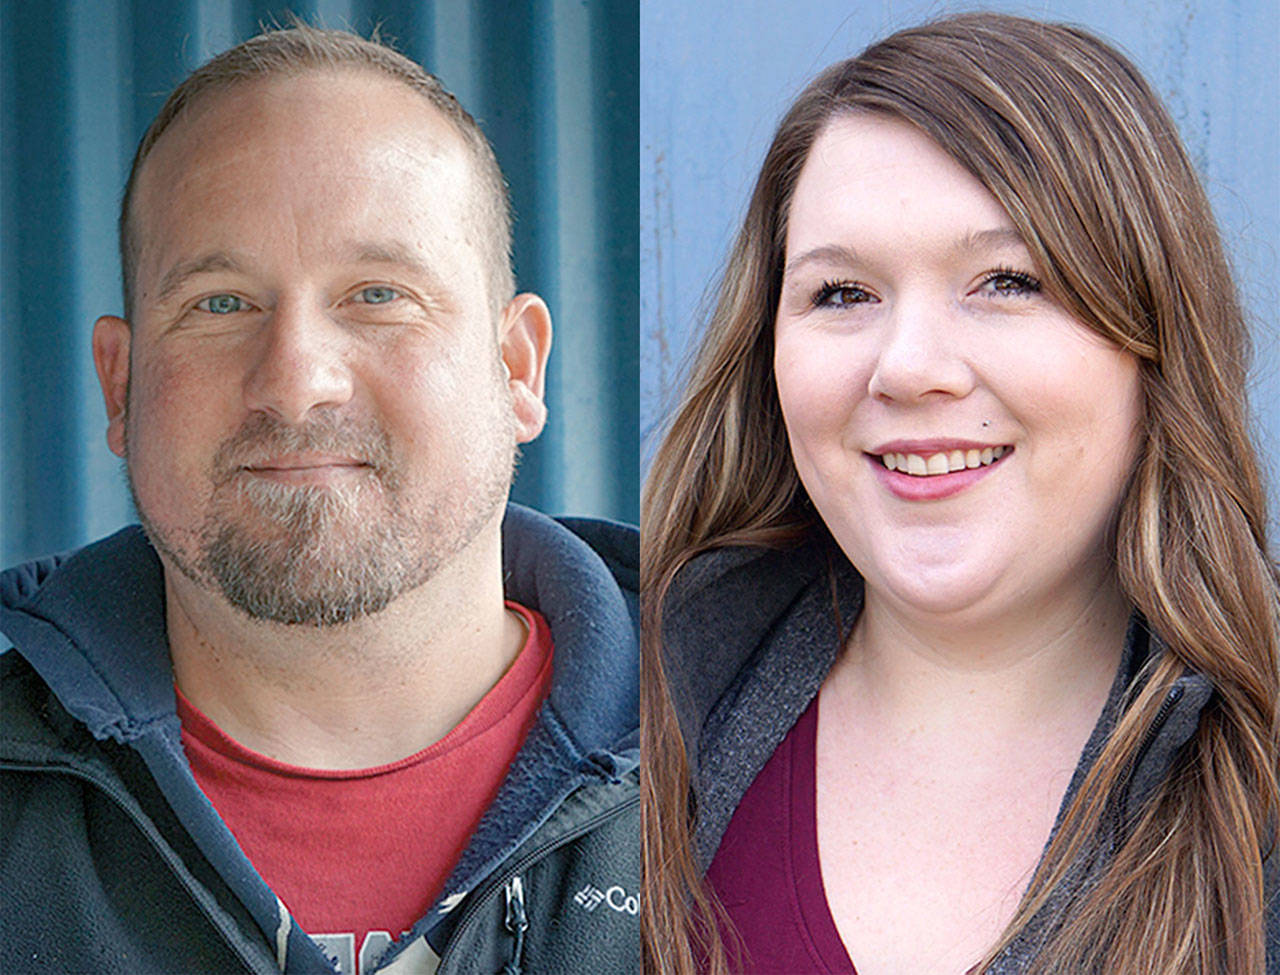 Jefferson County Public Utility District has hired Kenny Yingling of Chimacum as a fleet and warehouse helper and Theresa Giese of Coyle as a new customer service representative.